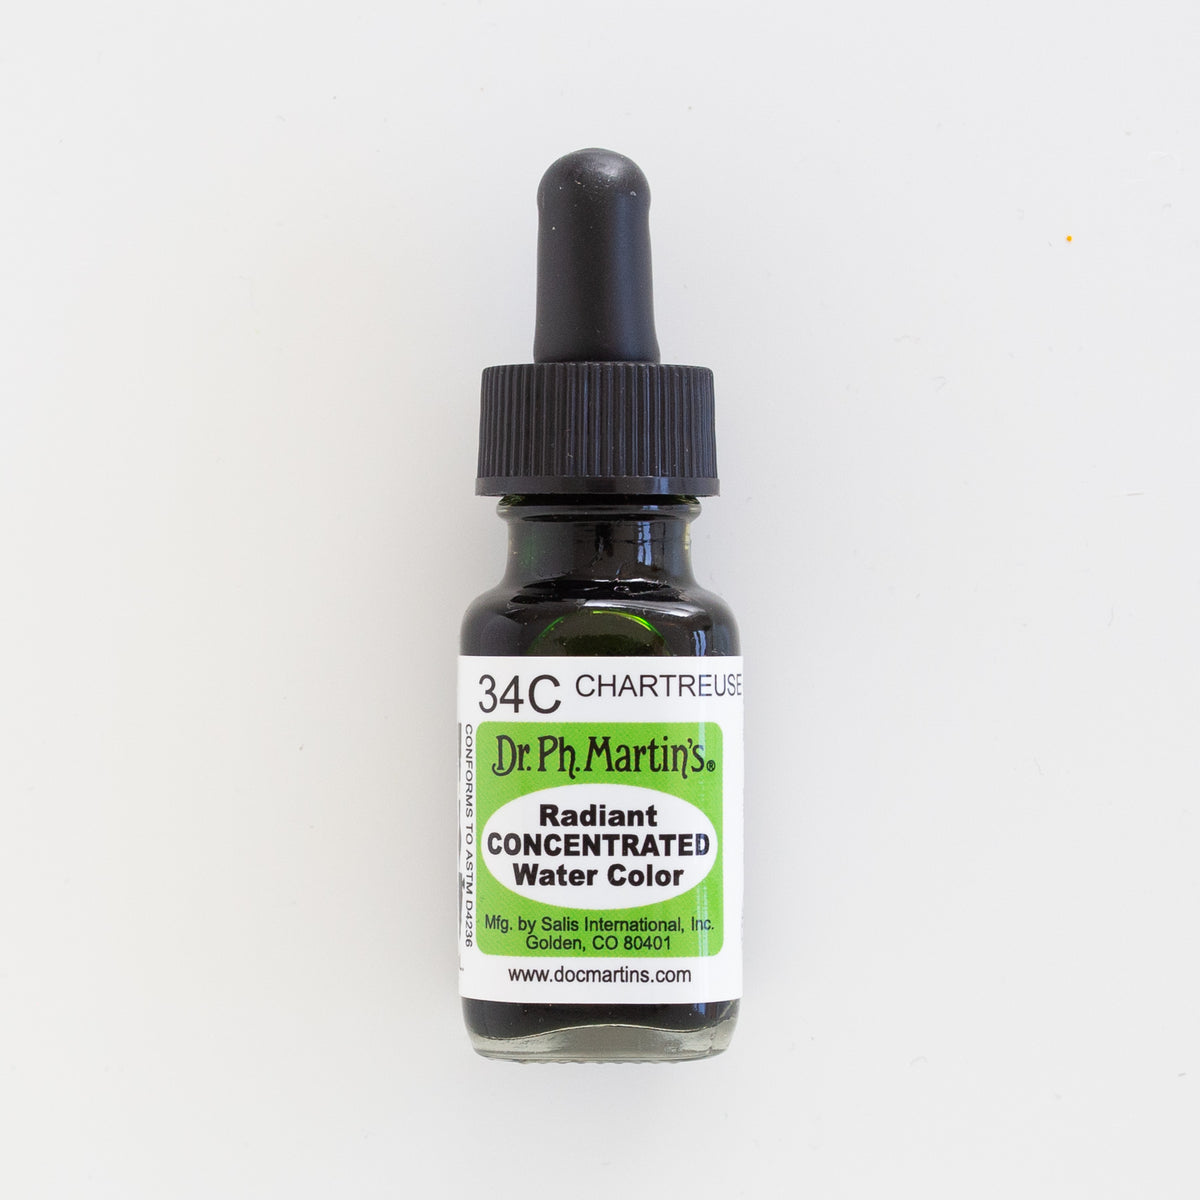 Dr. Ph. Martin’s Radiant Concentrated 34C Chartreuse